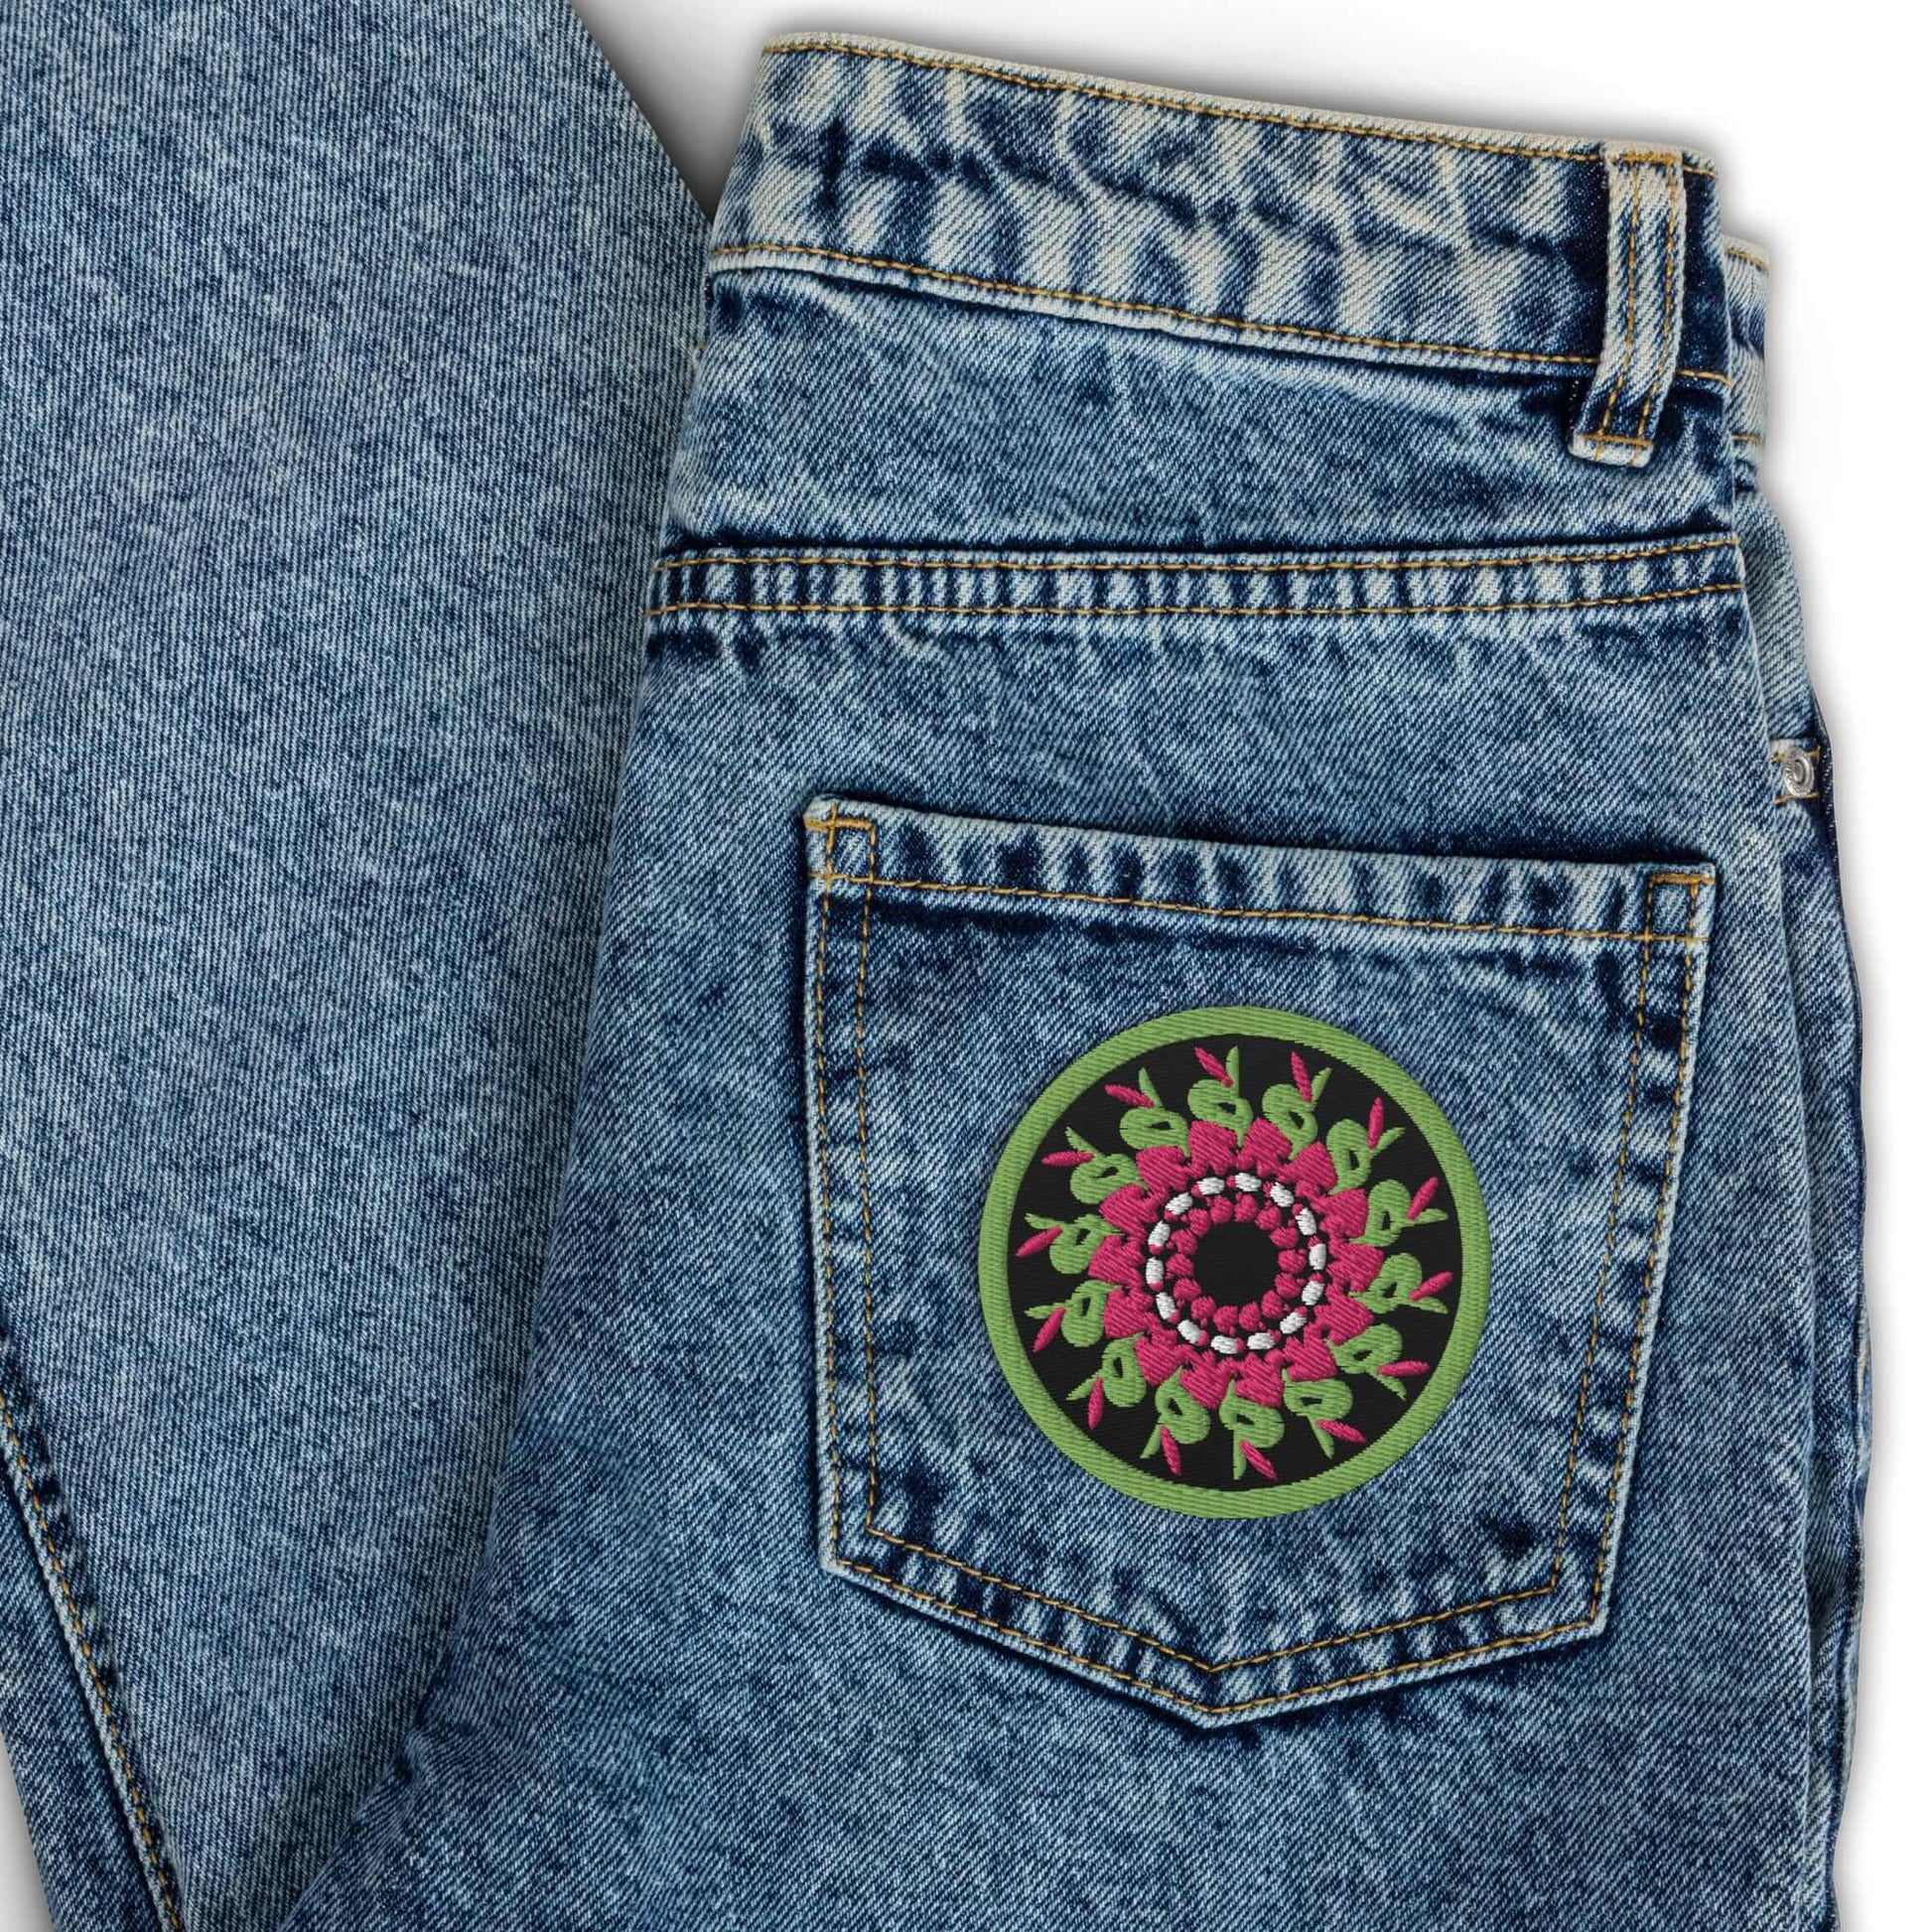 custom-iron-on-patches-for-jeans